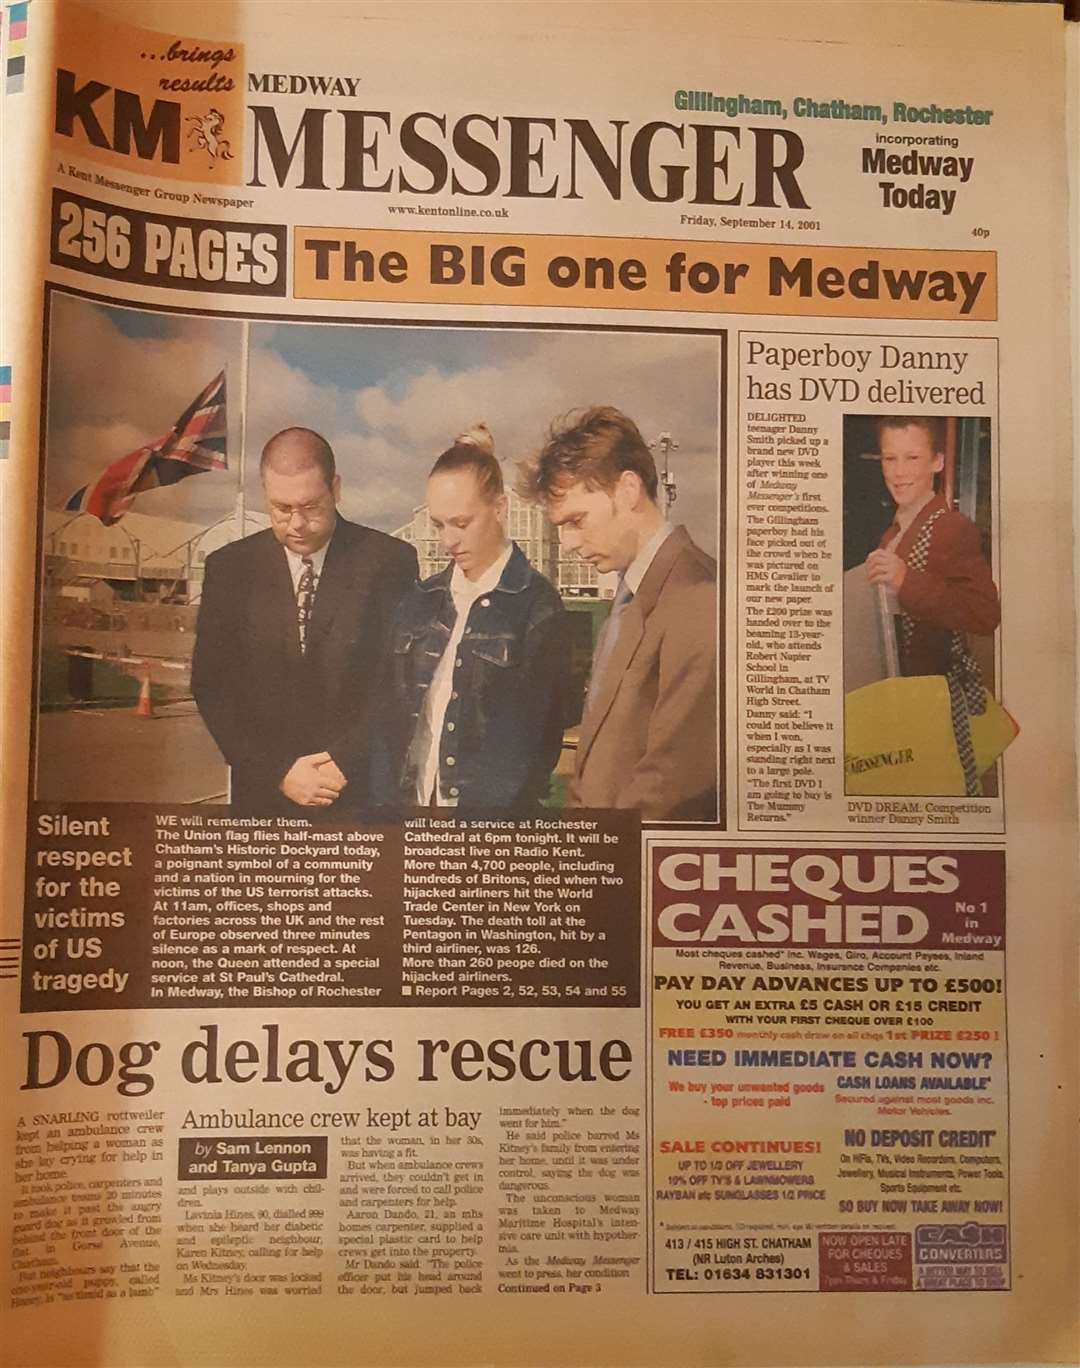 The front of the Medway Messenger's second edition